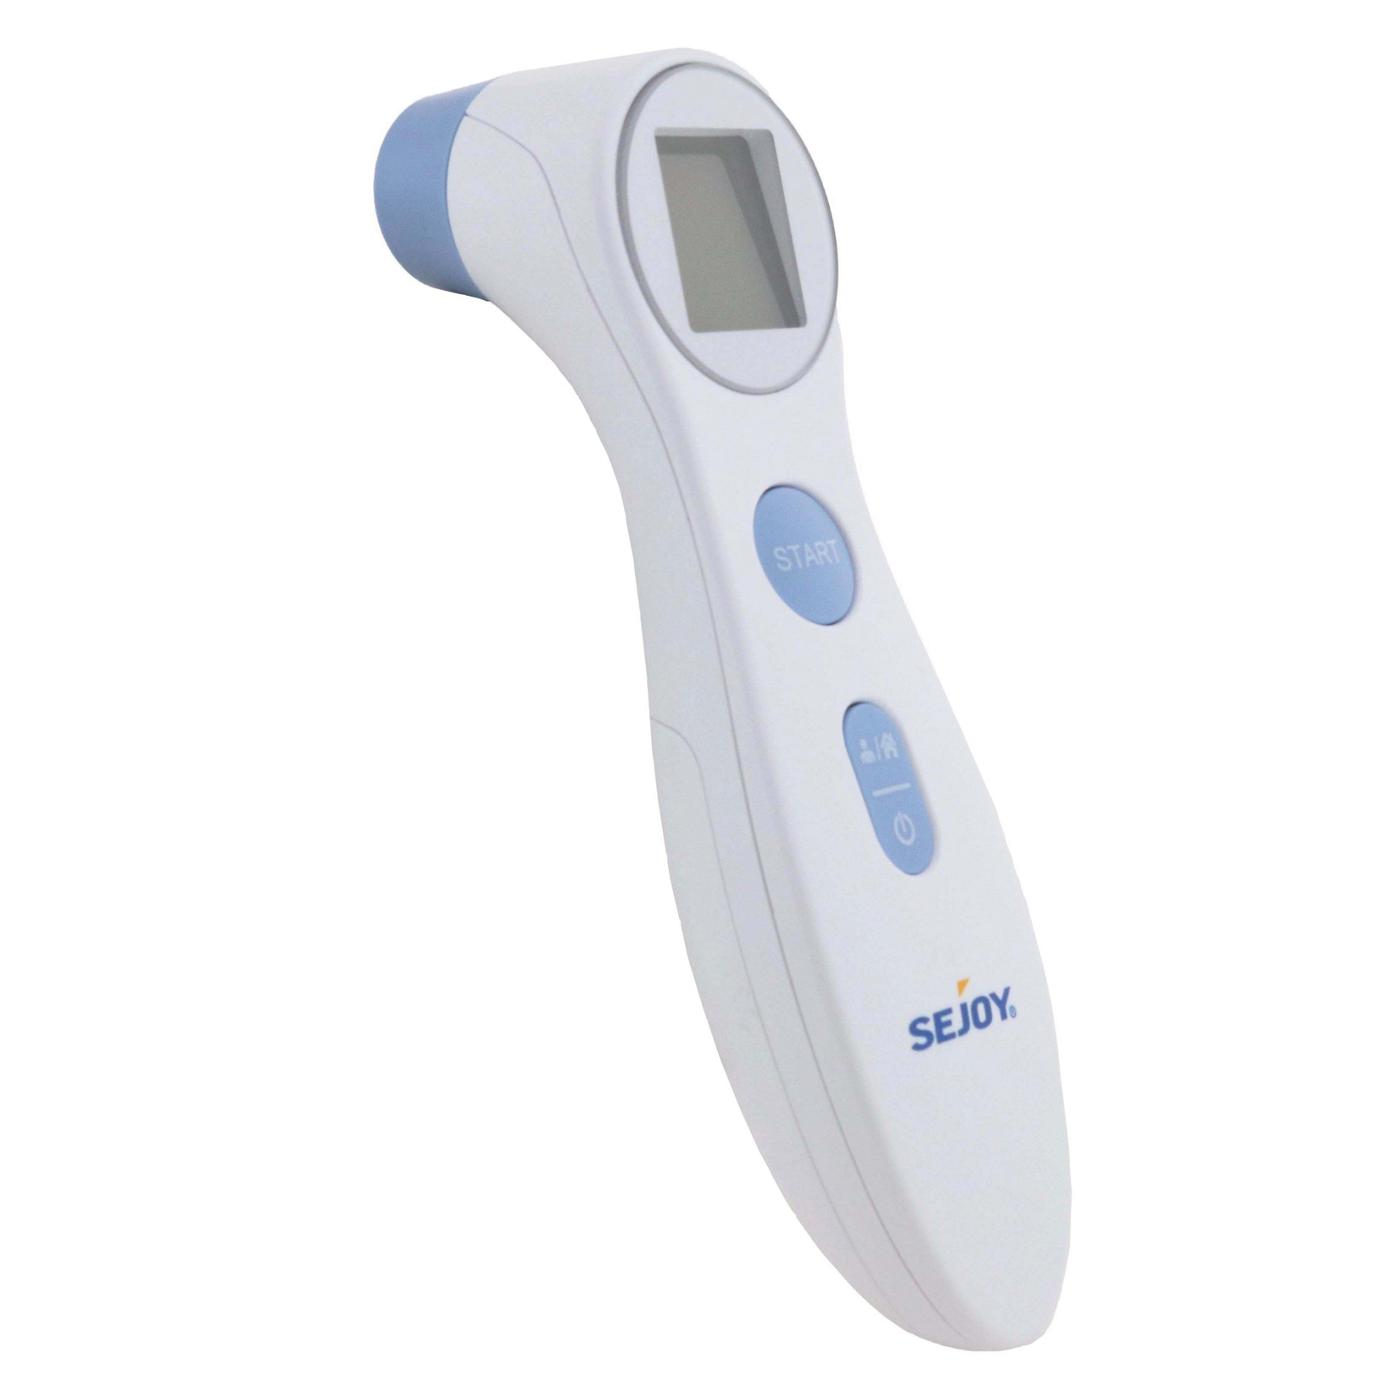 Sejoy Infrared Forehead Thermometer; image 1 of 3